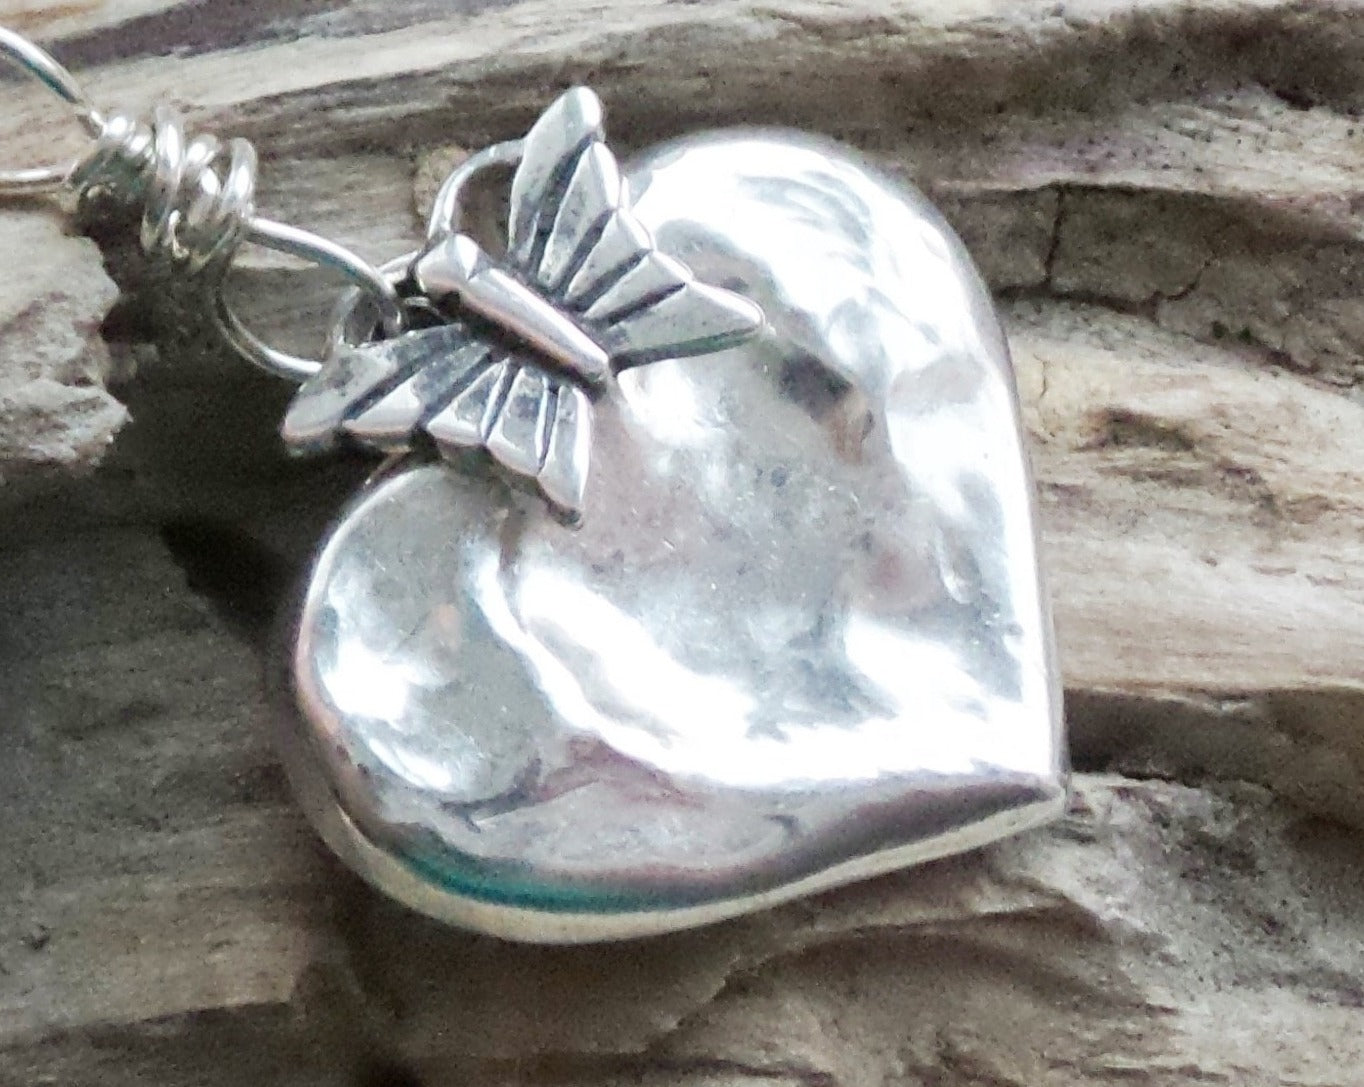 Heart Butterfly Transformation Pedant Necklace, Upcycled & New Sterling Silver